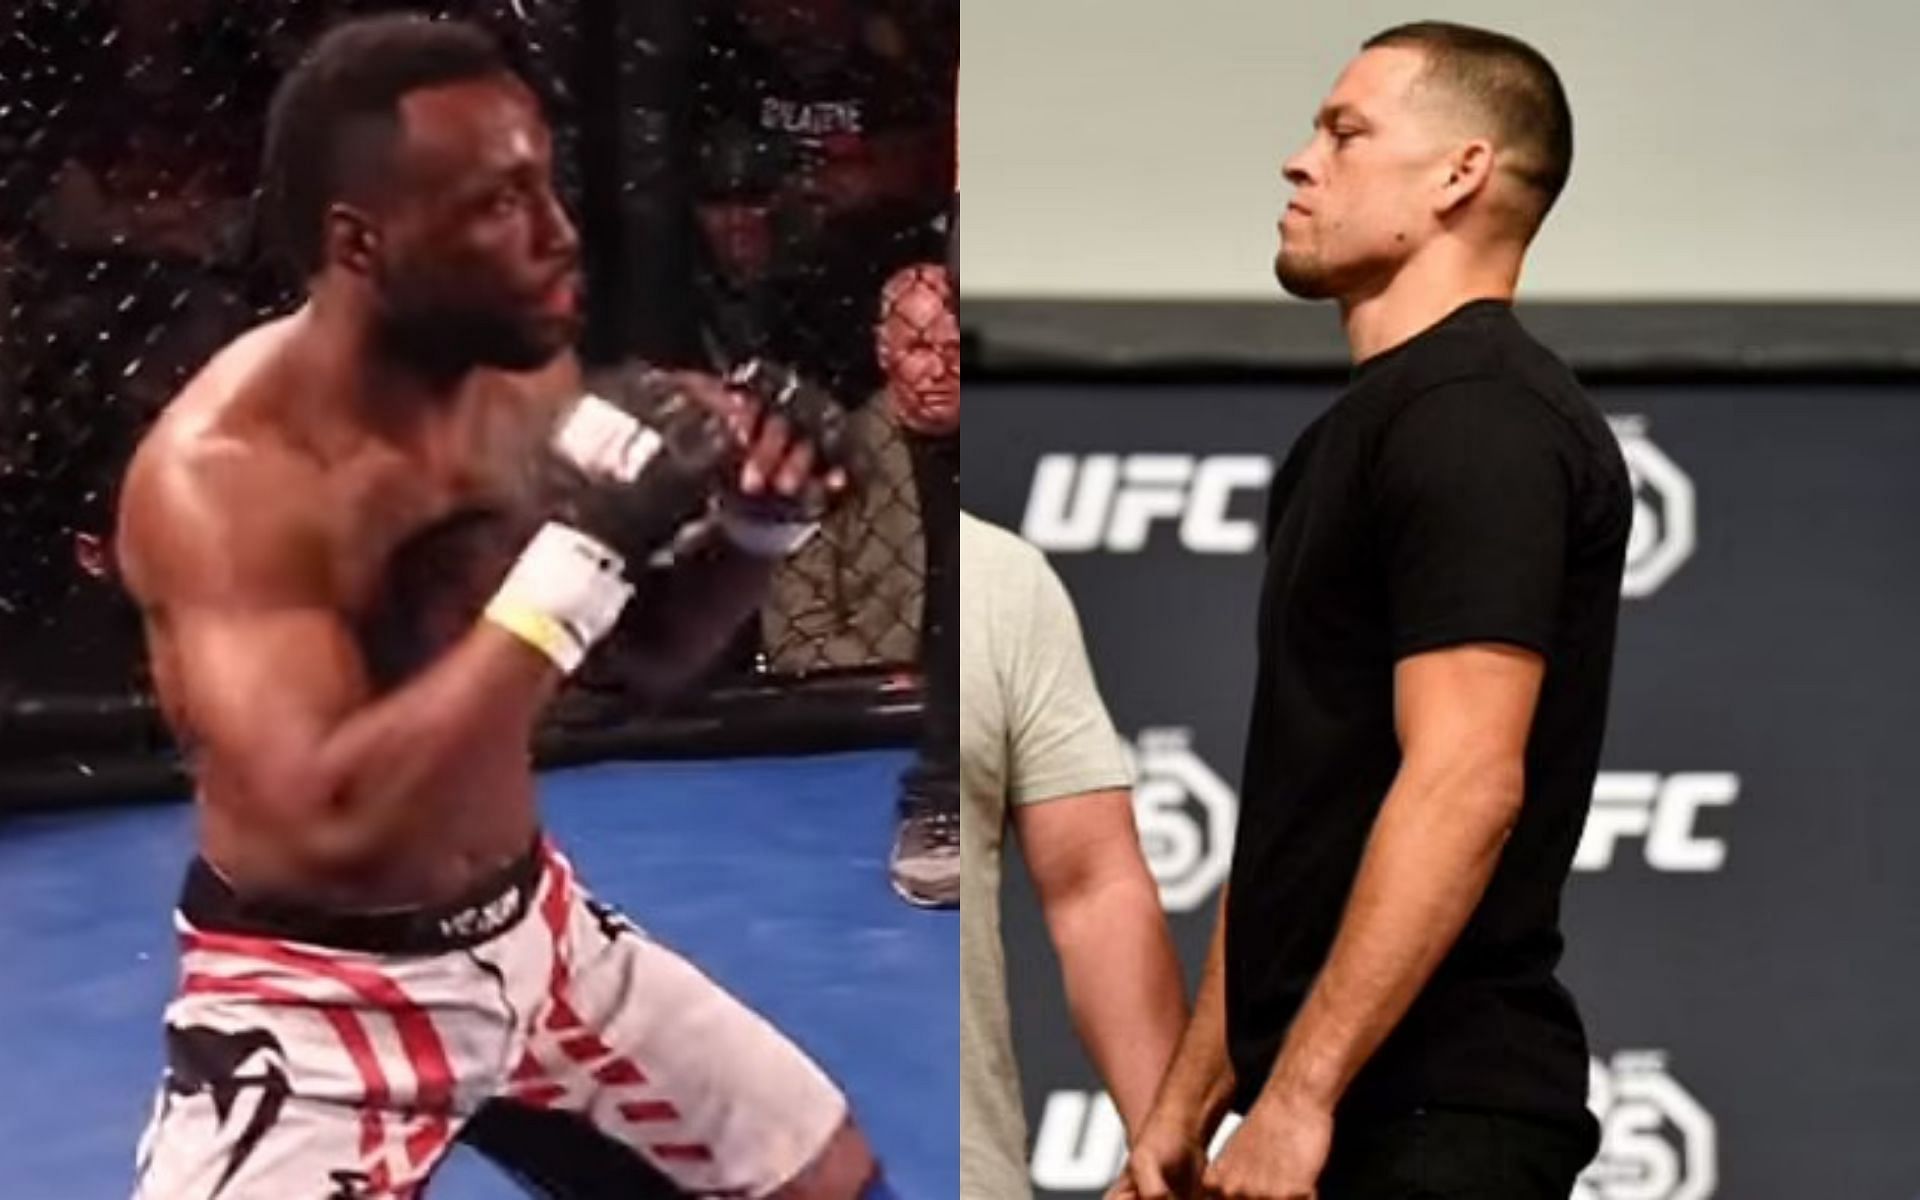 Carrese Archer (left) and Nate Diaz (right) [Archer image courtesy - Tapology]